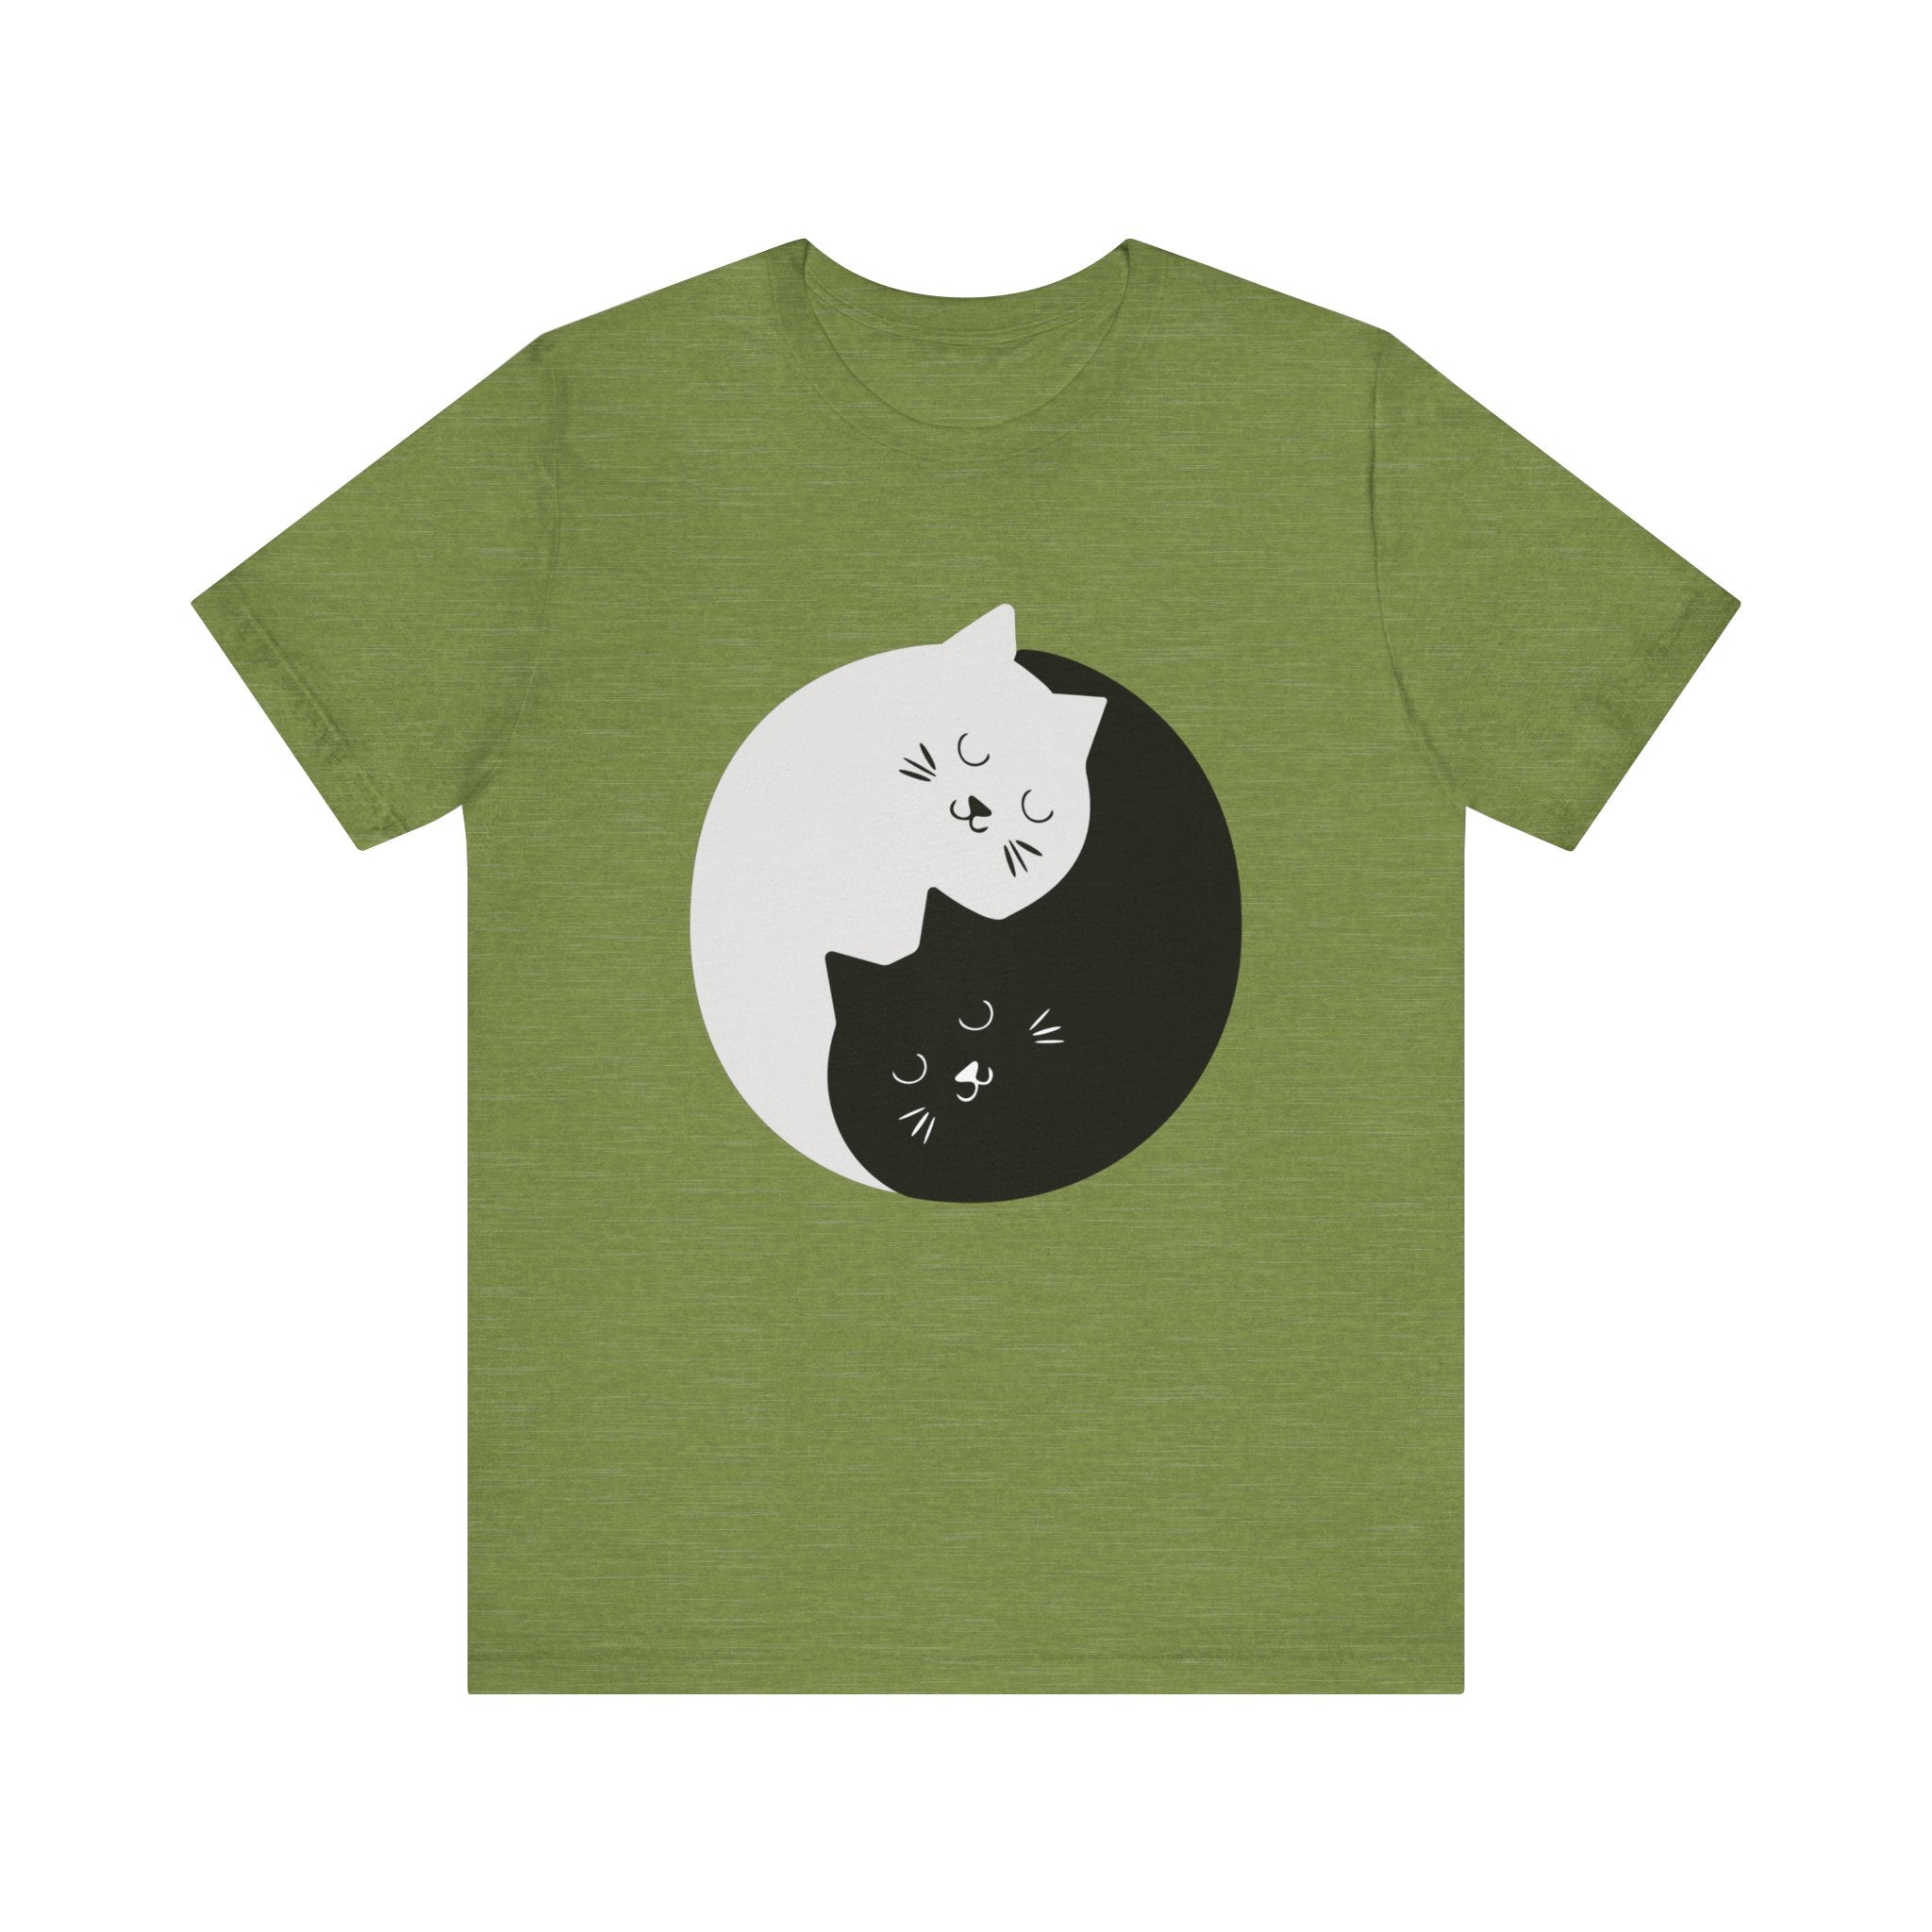 Unisex tee featuring a graphic of the YING-ANG KITTIES symbol made up of two cats.